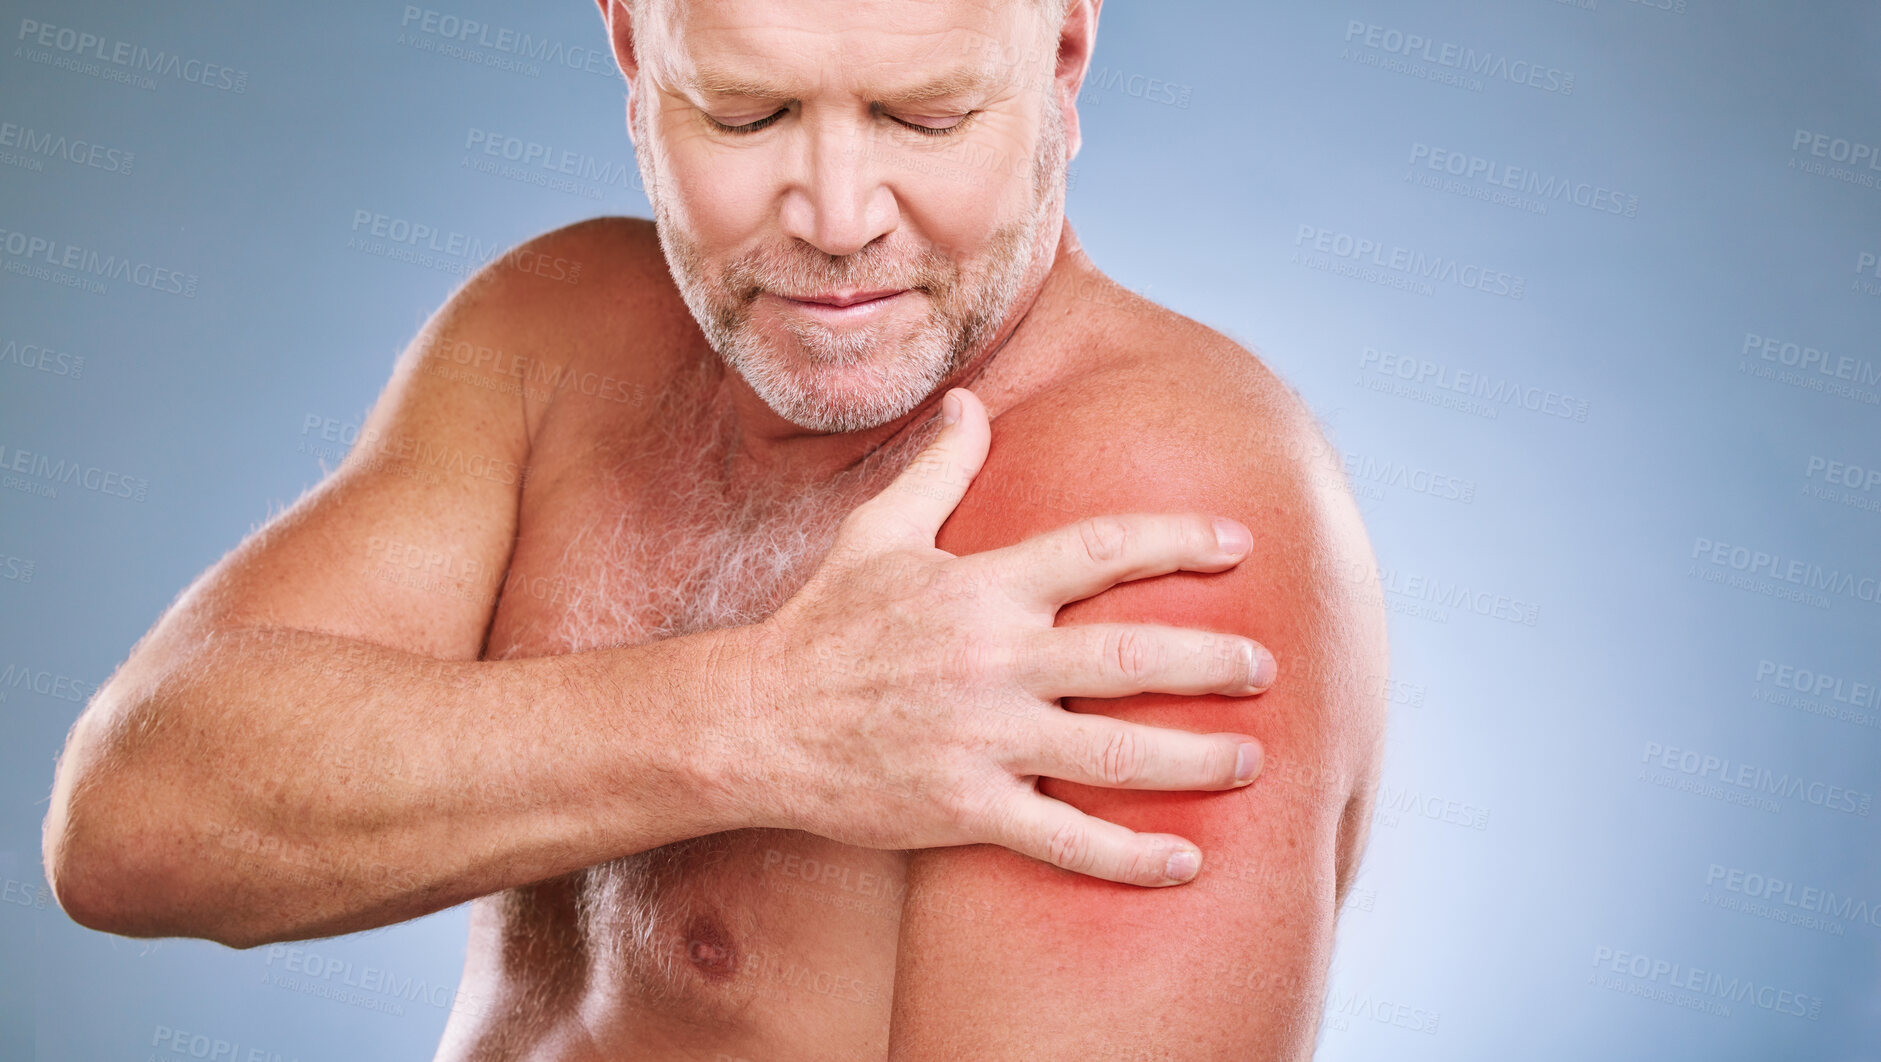 Buy stock photo Senior man, arm pain and red glow on muscle or body on a blue background in studio with arthritis. Elderly model person with hand on injury, anatomy health problem or broken bone medical risk